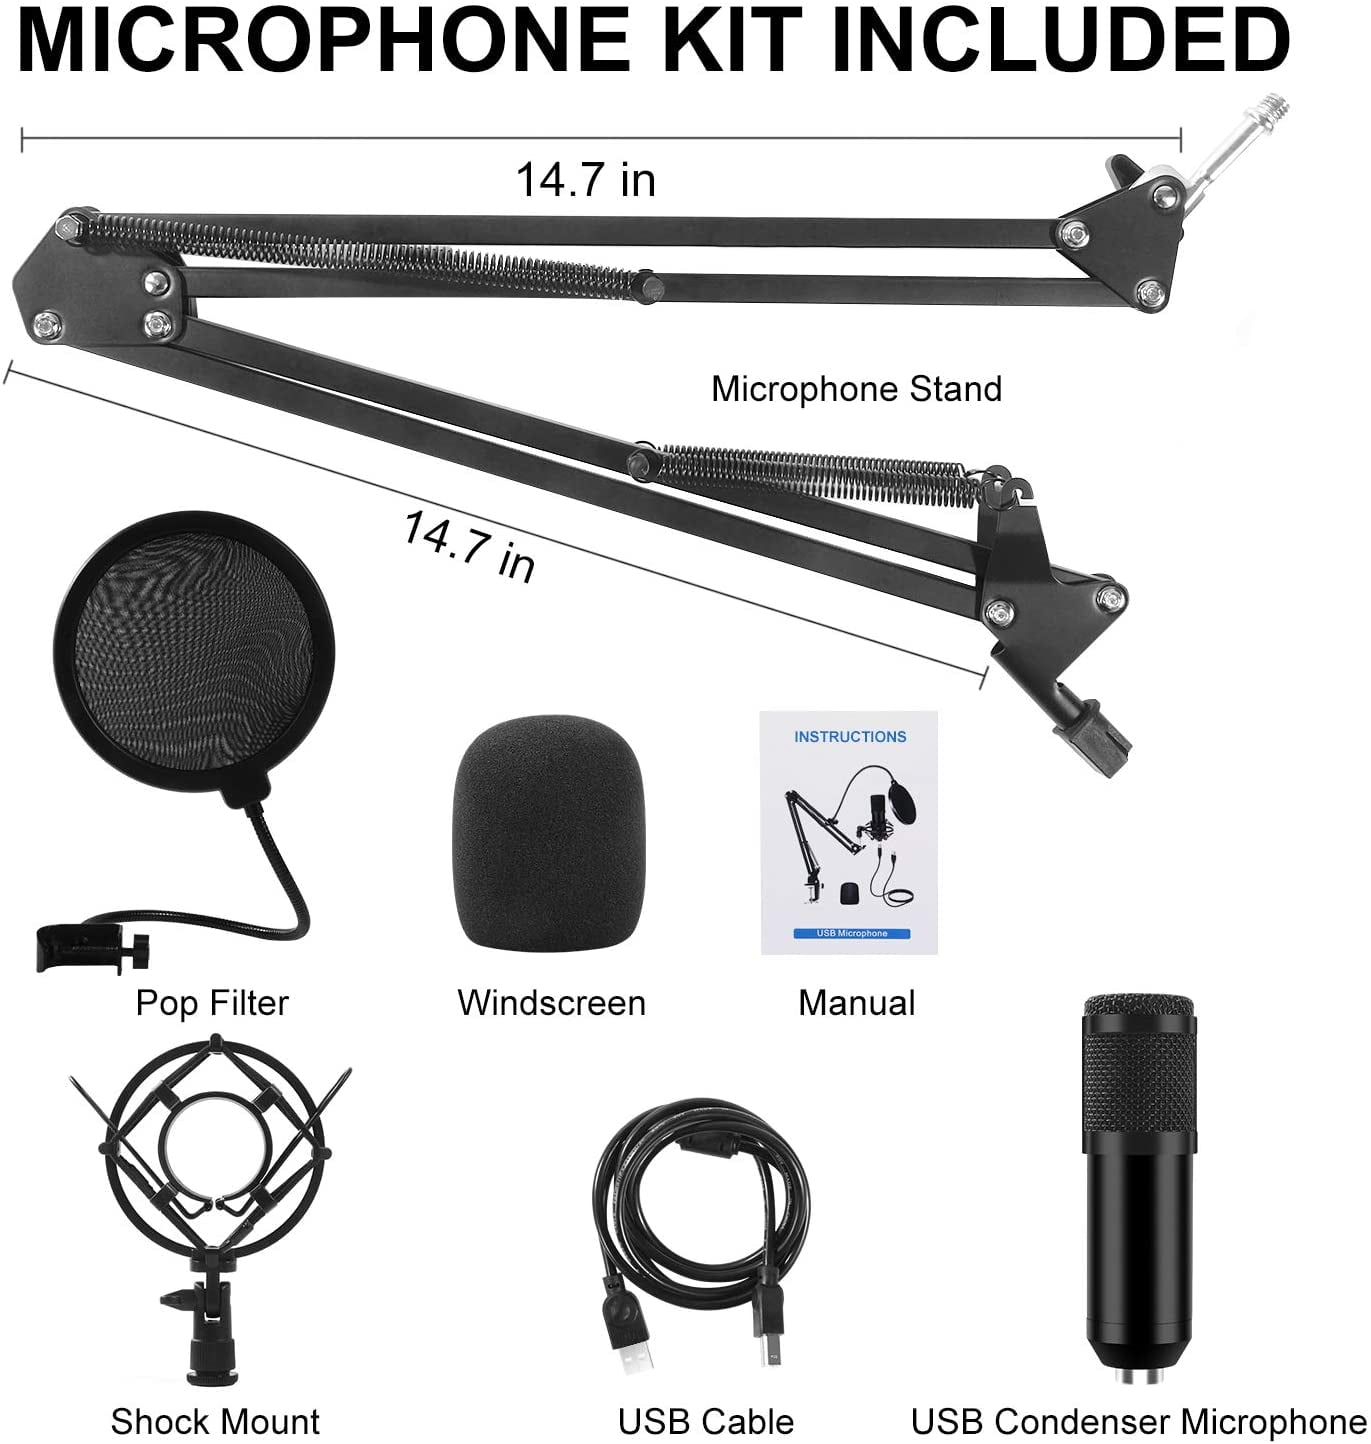  Pyle USB Microphone Podcast Recording Kit - Audio Cardioid  Condenser Mic w/Desktop Stand and Pop Filter - for Gaming PS4, Streaming,  Podcasting, Studio, , Works w/Windows Mac PC PDMIKT120 : Musical